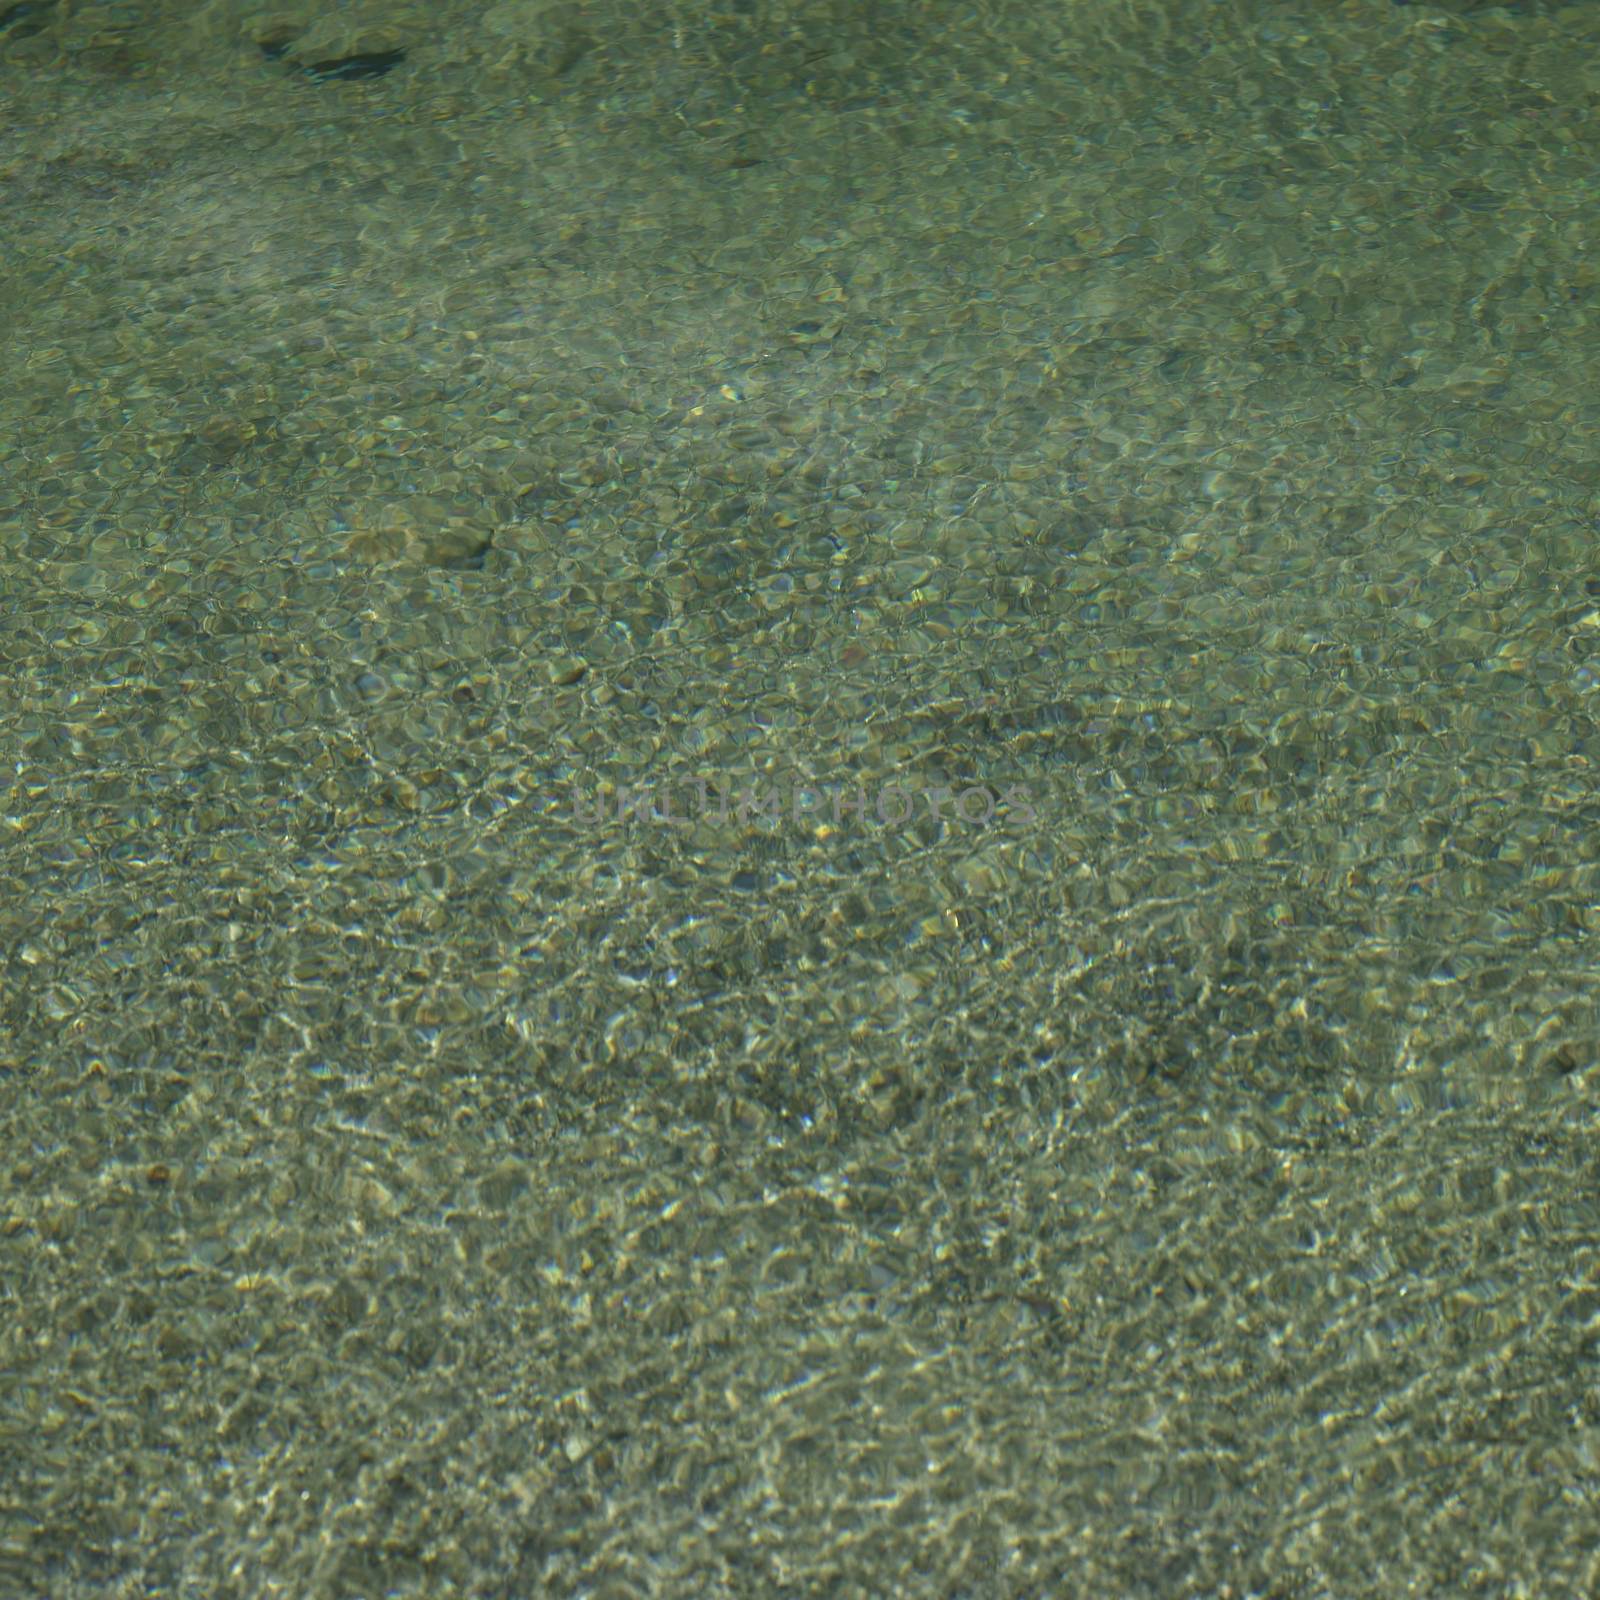 Clear river water flows over rocky bottom